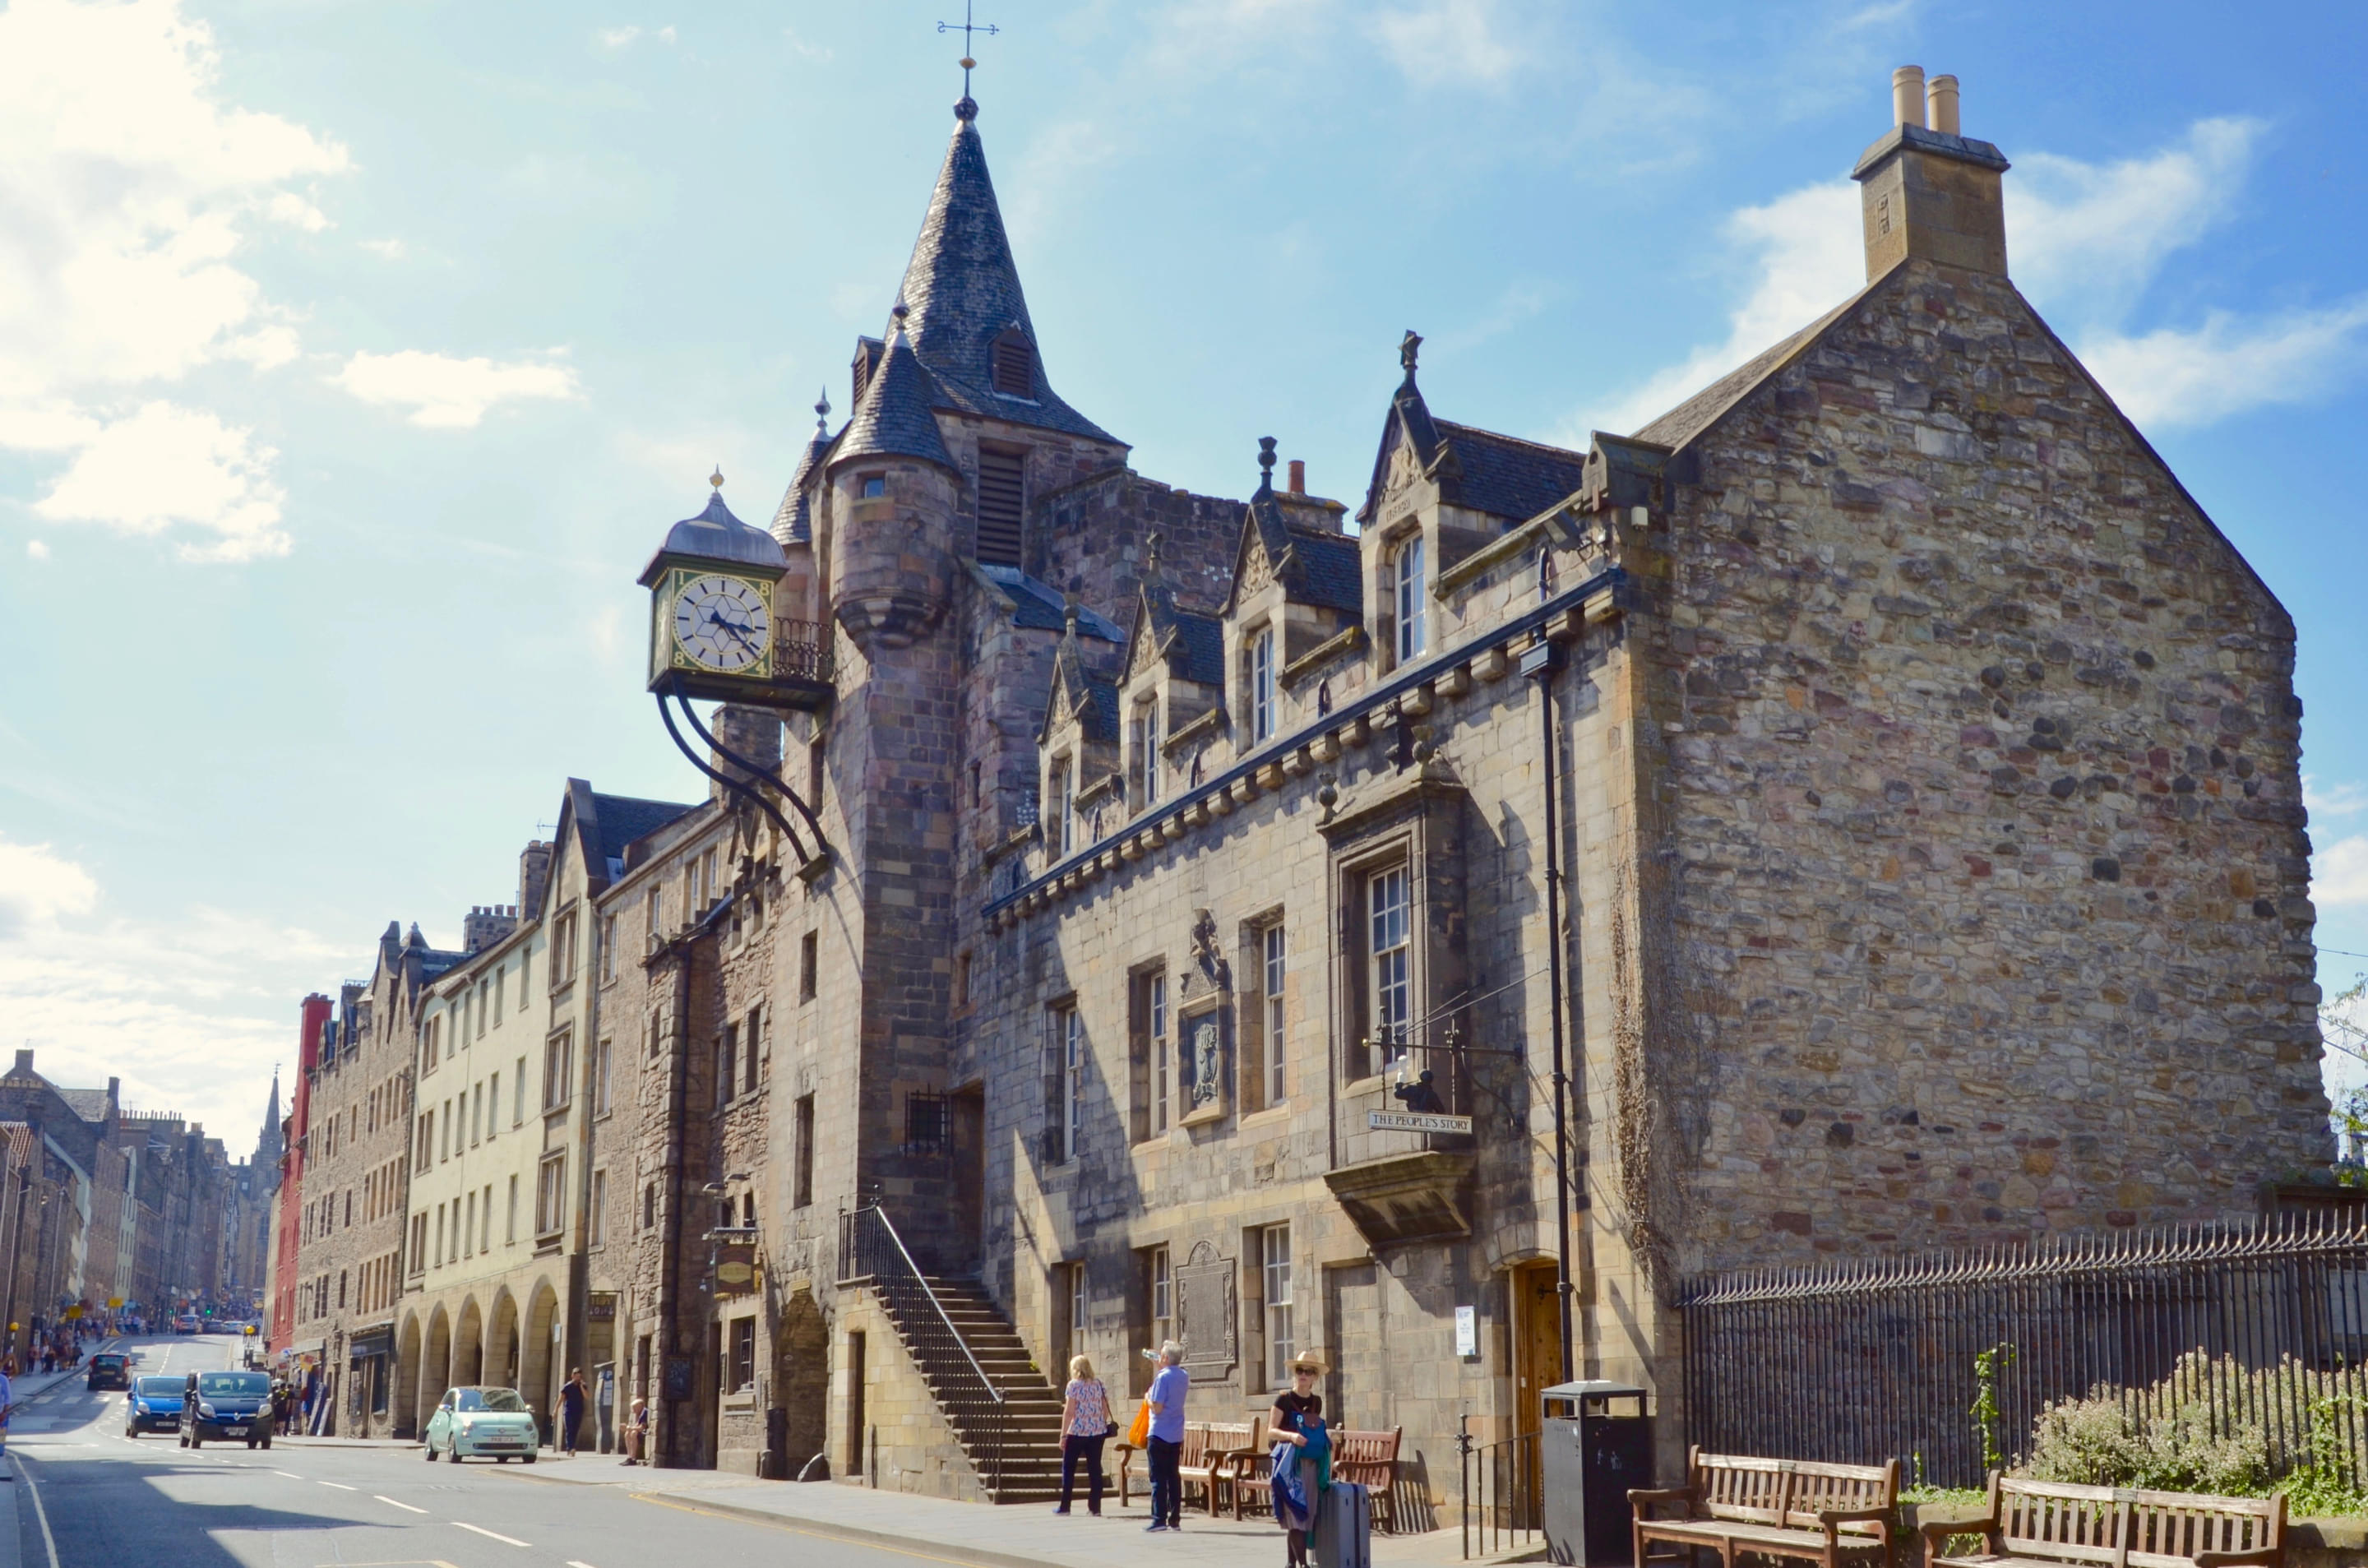 The Tolbooth Museum Overview